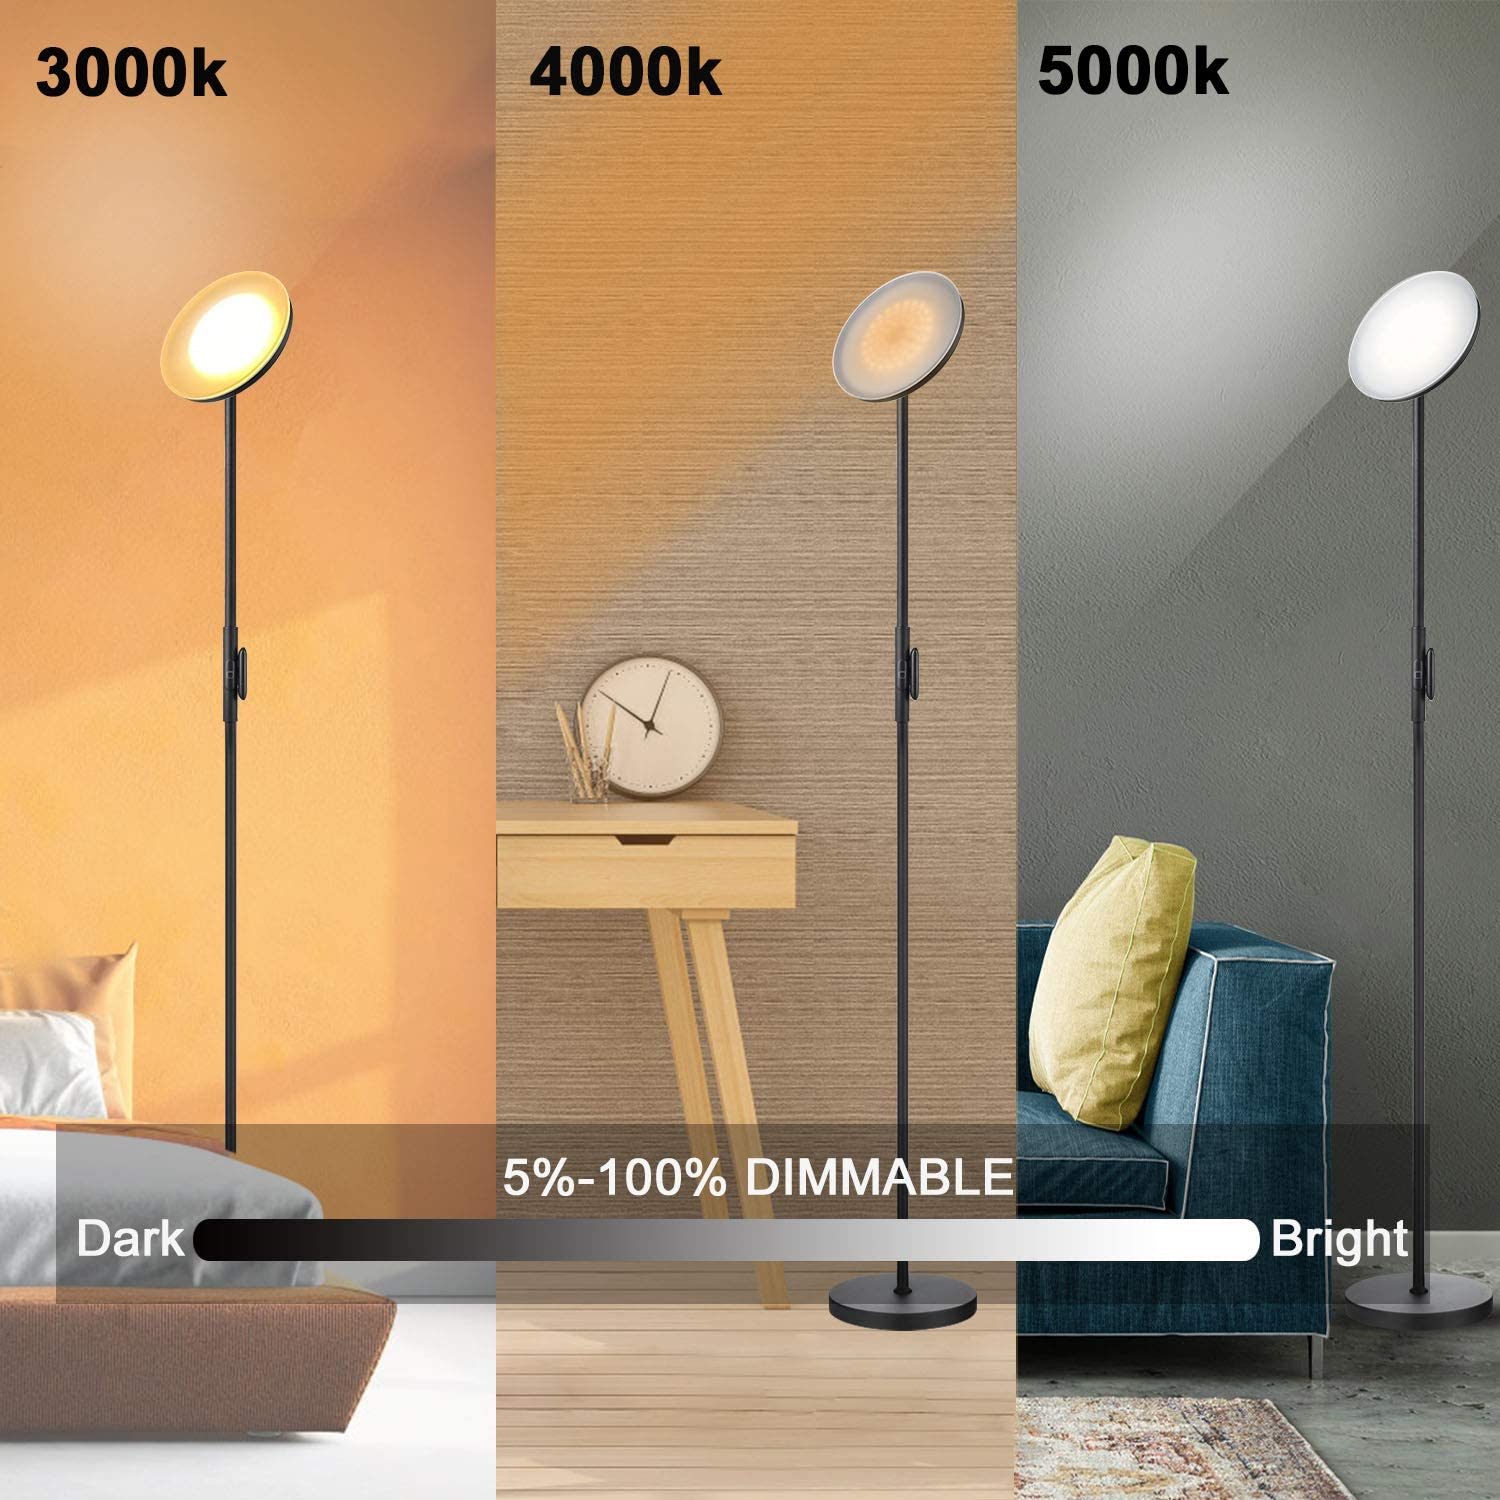 JOOFO Floor Lamp,30W/2400LM Sky LED Modern Torchiere 3 Color Temperatures Super Bright-Tall Standing Pole Light with Remote & Touch Control for Living Room,Bed Room,Office (Black)